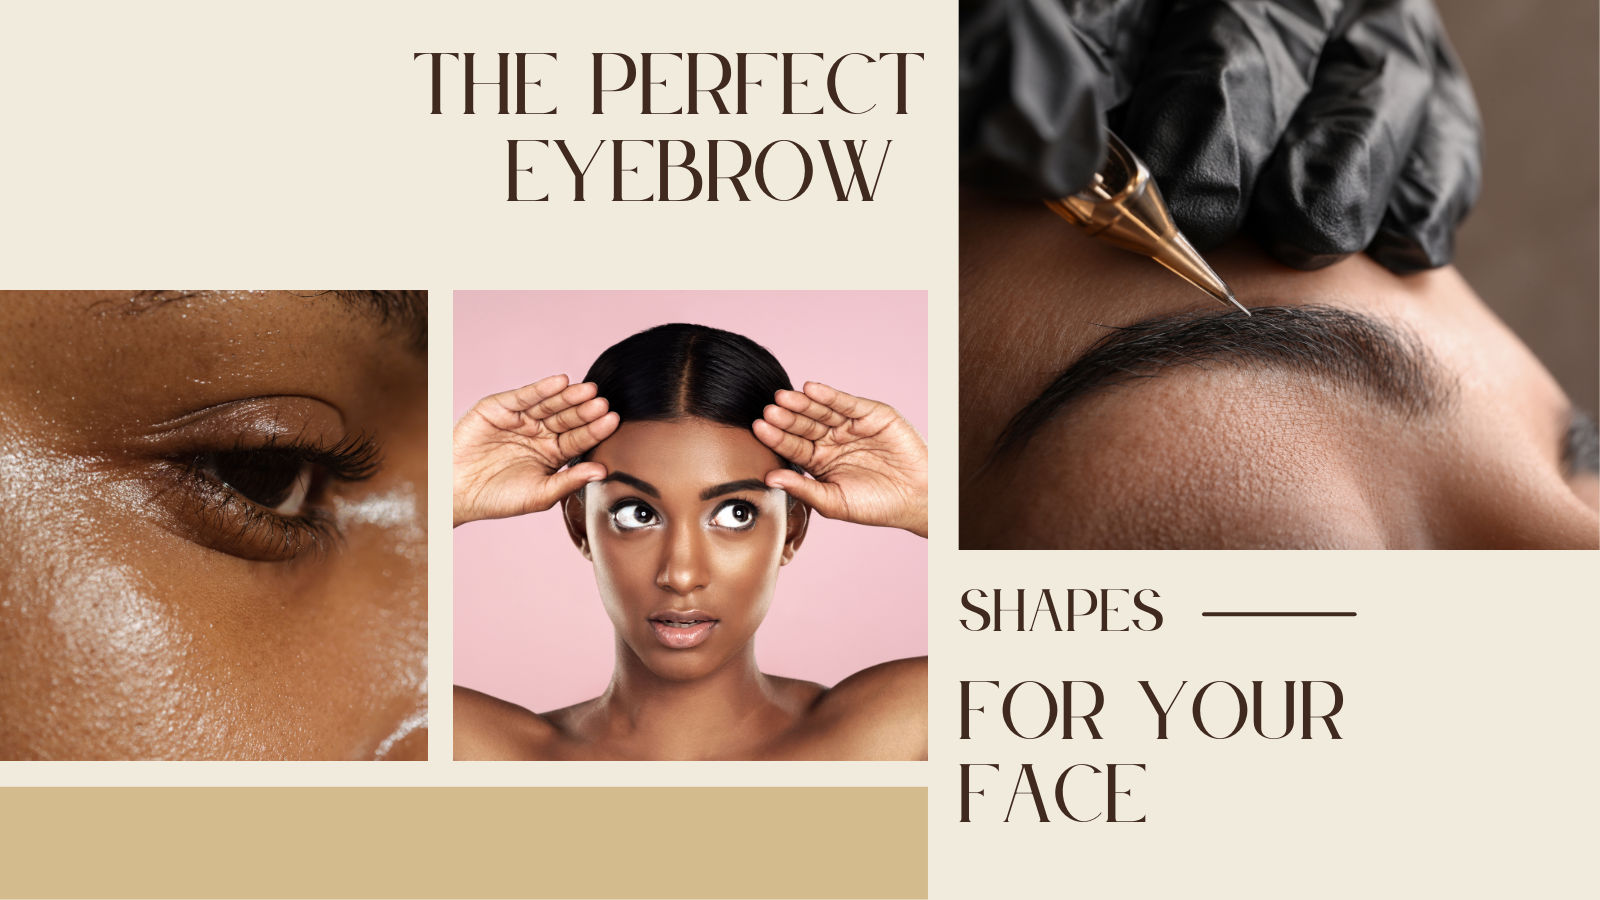 The Perfect Eyebrow Shapes for Your Face